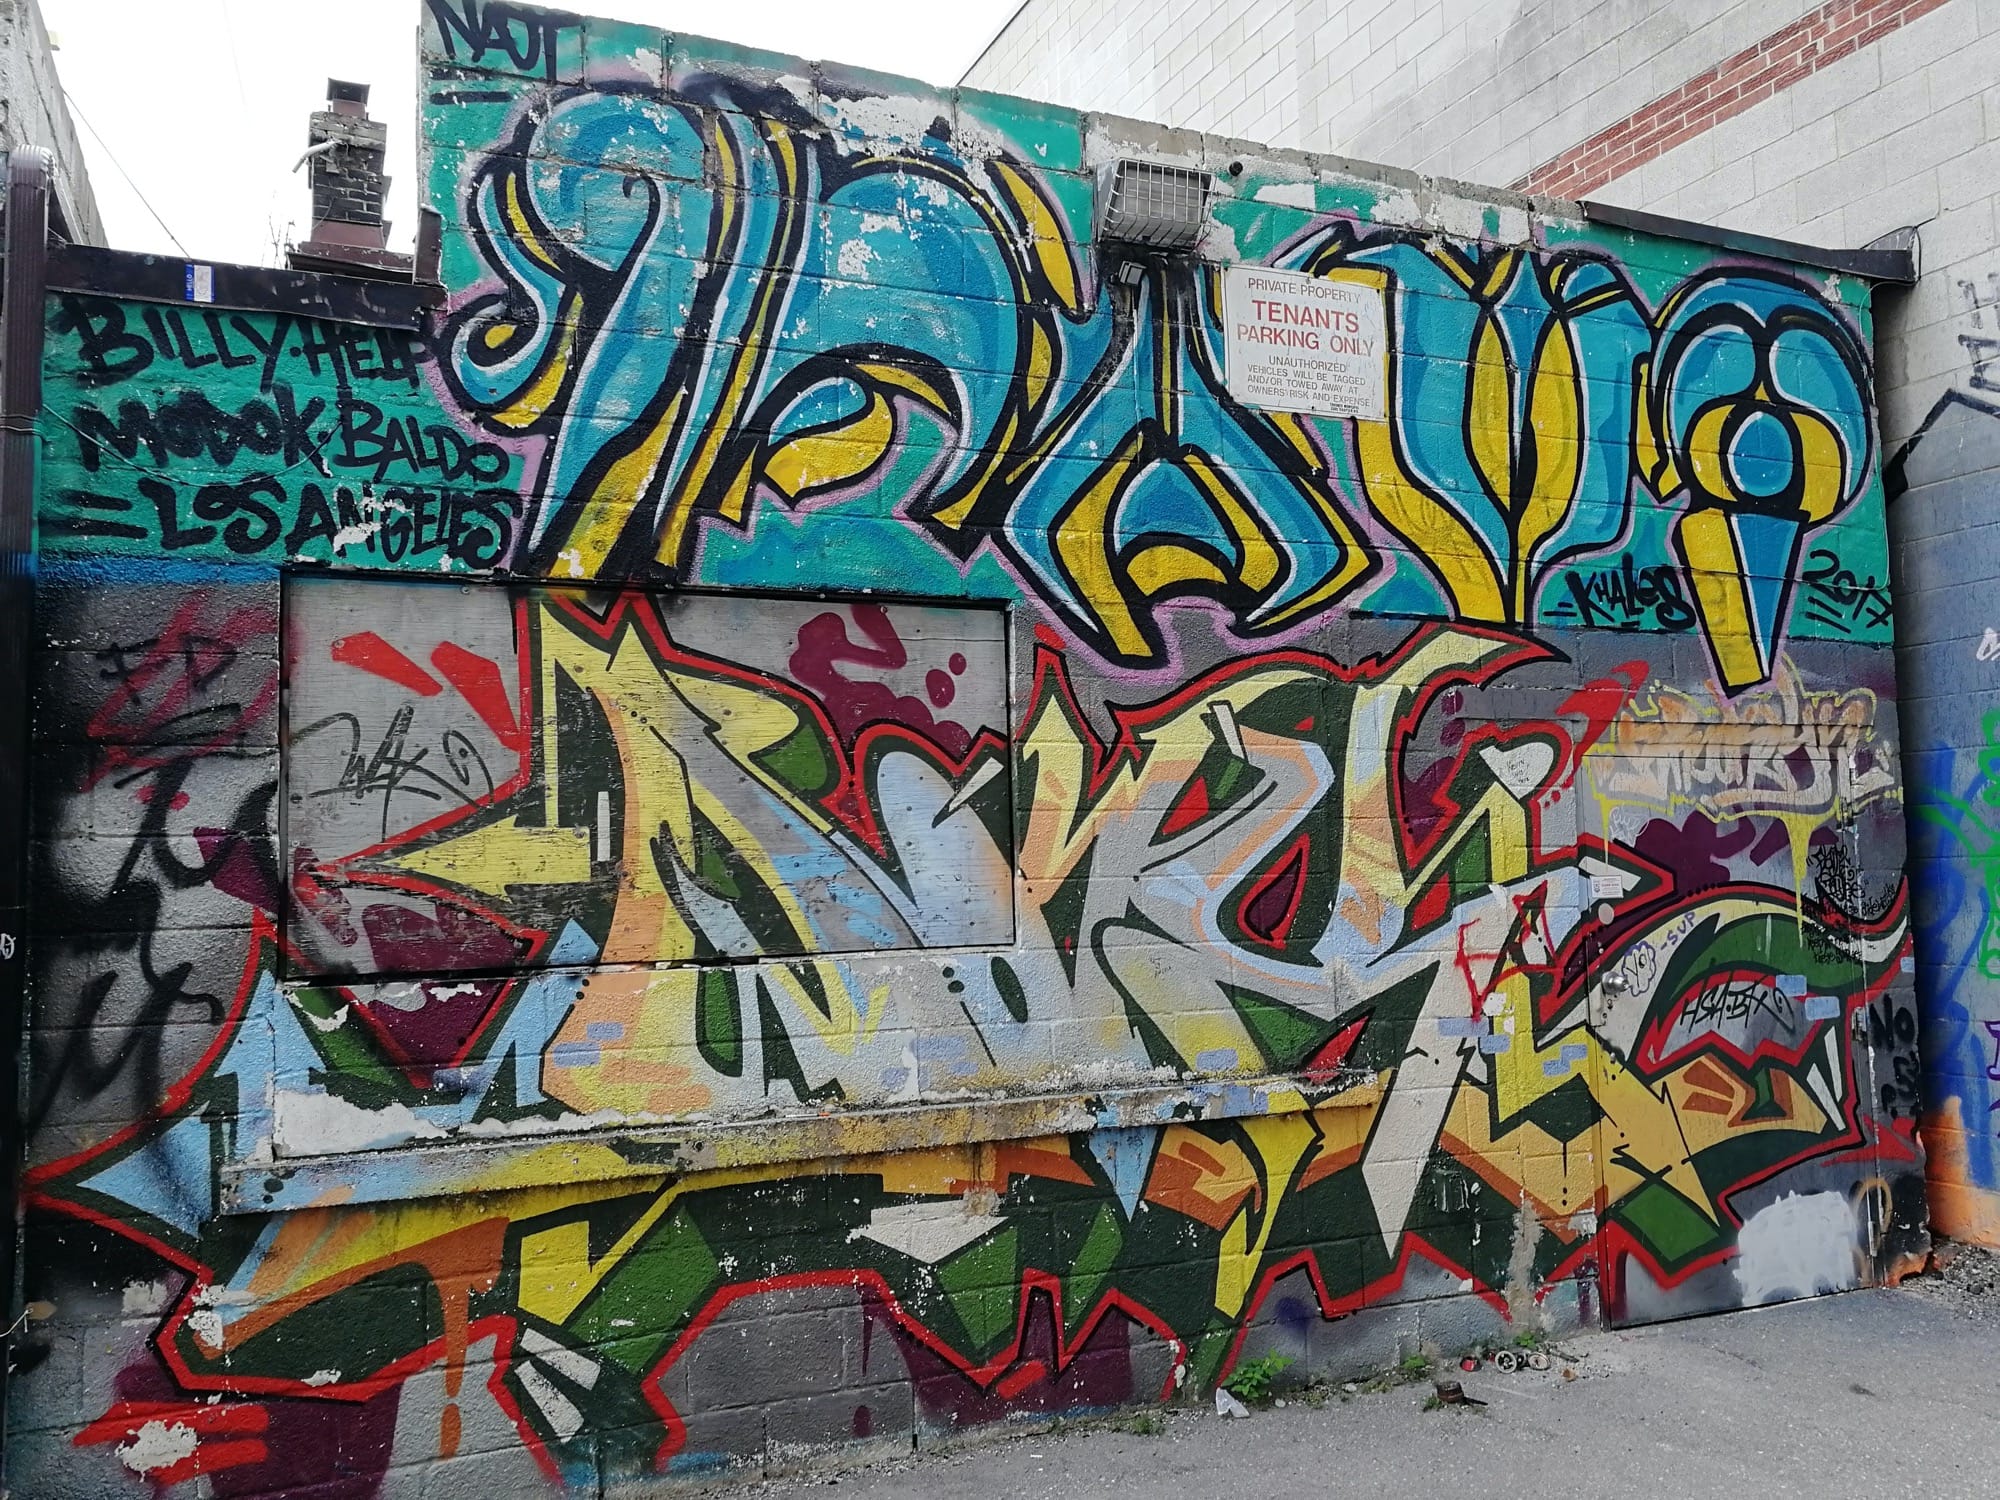 Graffiti 2588  captured by Rabot in Toronto Canada